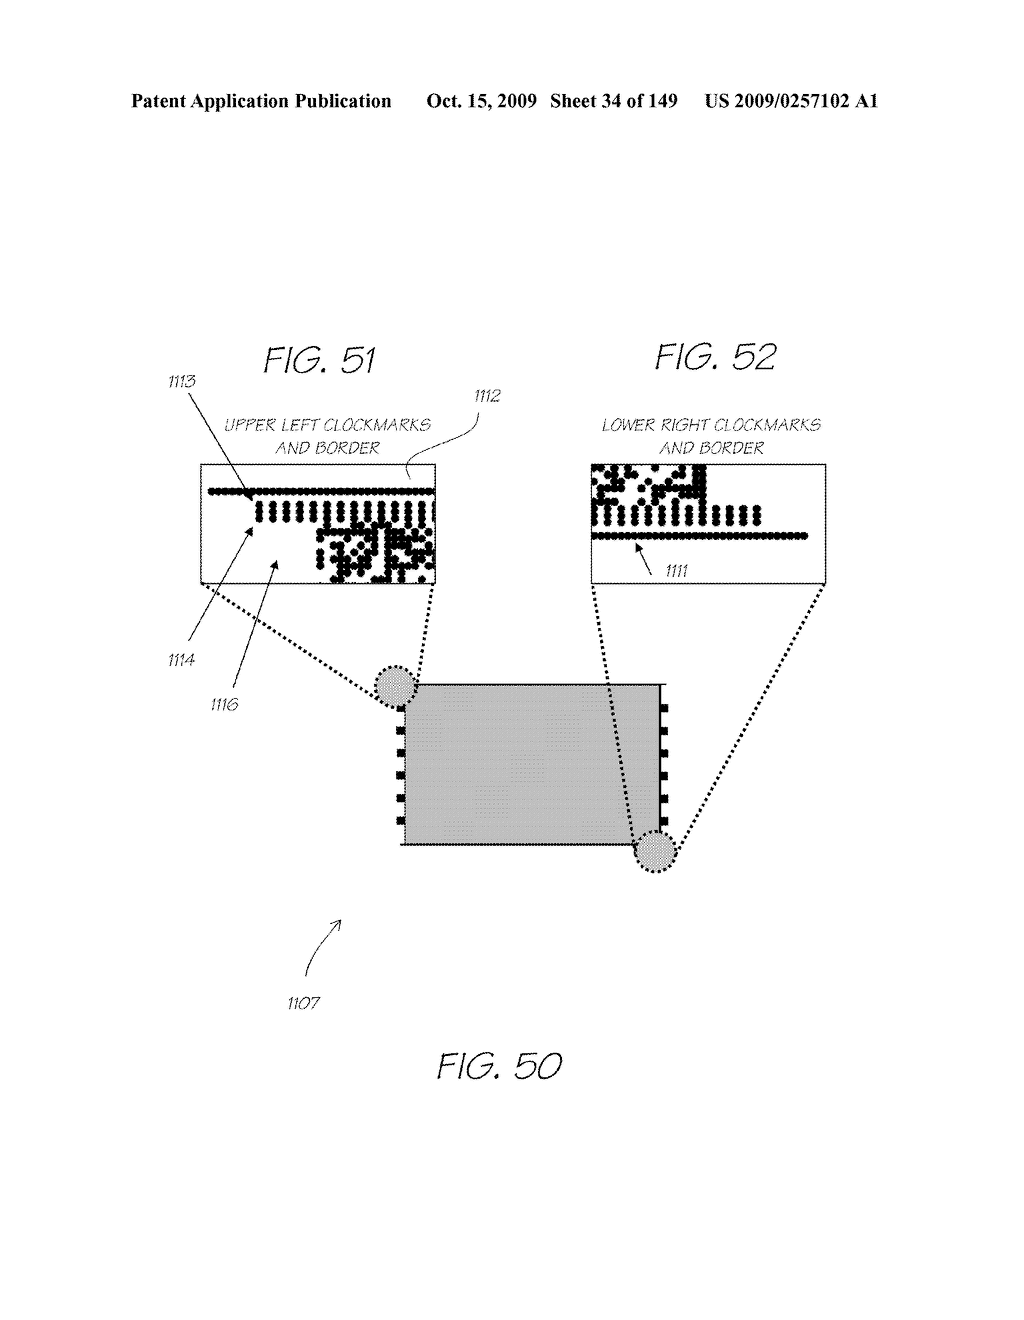 IMAGE PROCESSING APPARATUS HAVING CARD READER FOR APPLYING EFFECTS STORED ON A CARD TO A STORED IMAGE - diagram, schematic, and image 35